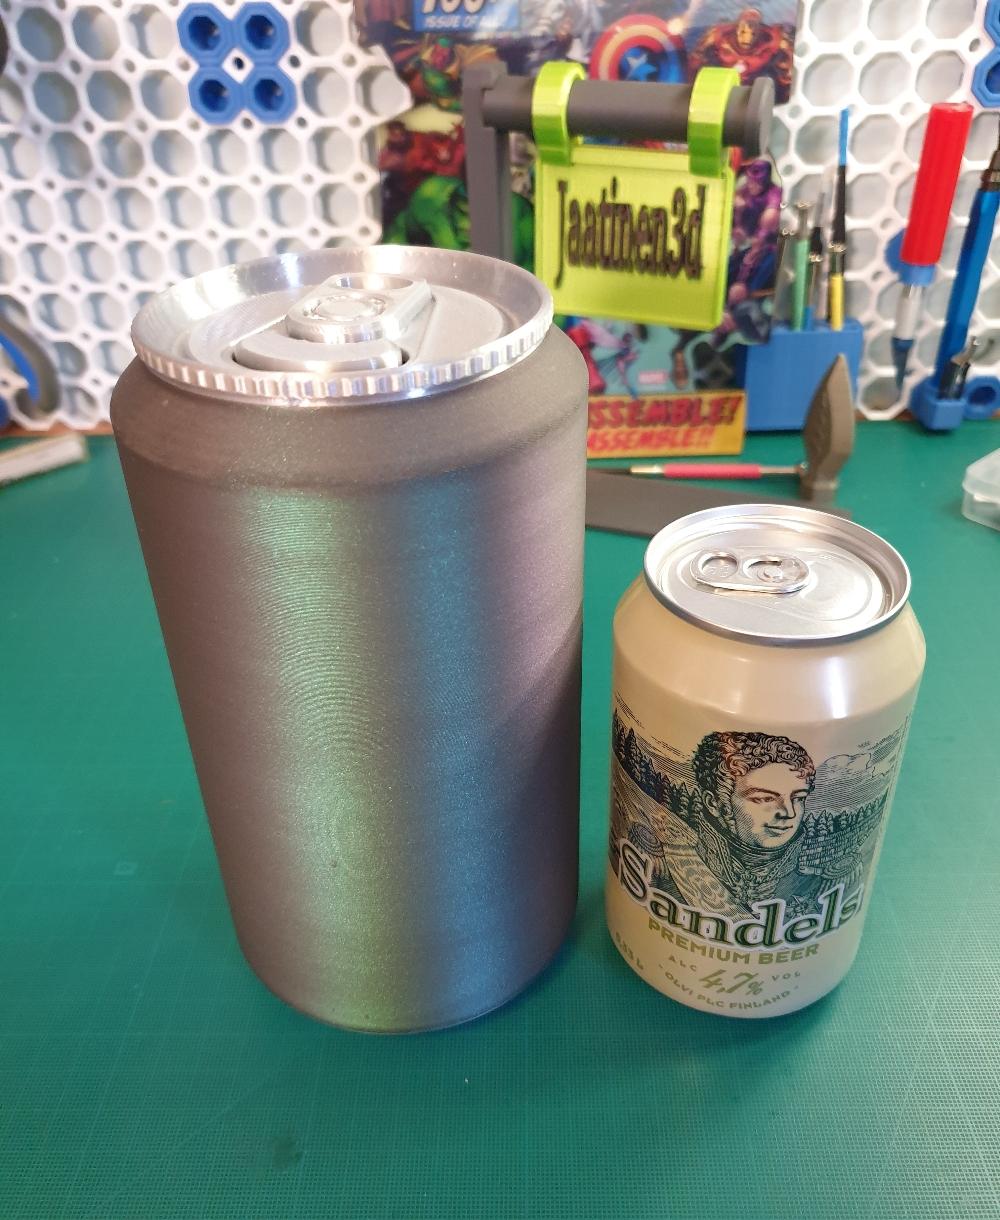 Secret Can Safe - I scaled it up to 140% to fit a real can inside as a gift for a friend! I had to scale the retaining rings 200% on the z-axis though, otherwise the mechanism was too loose to lock the rotating clip. - 3d model